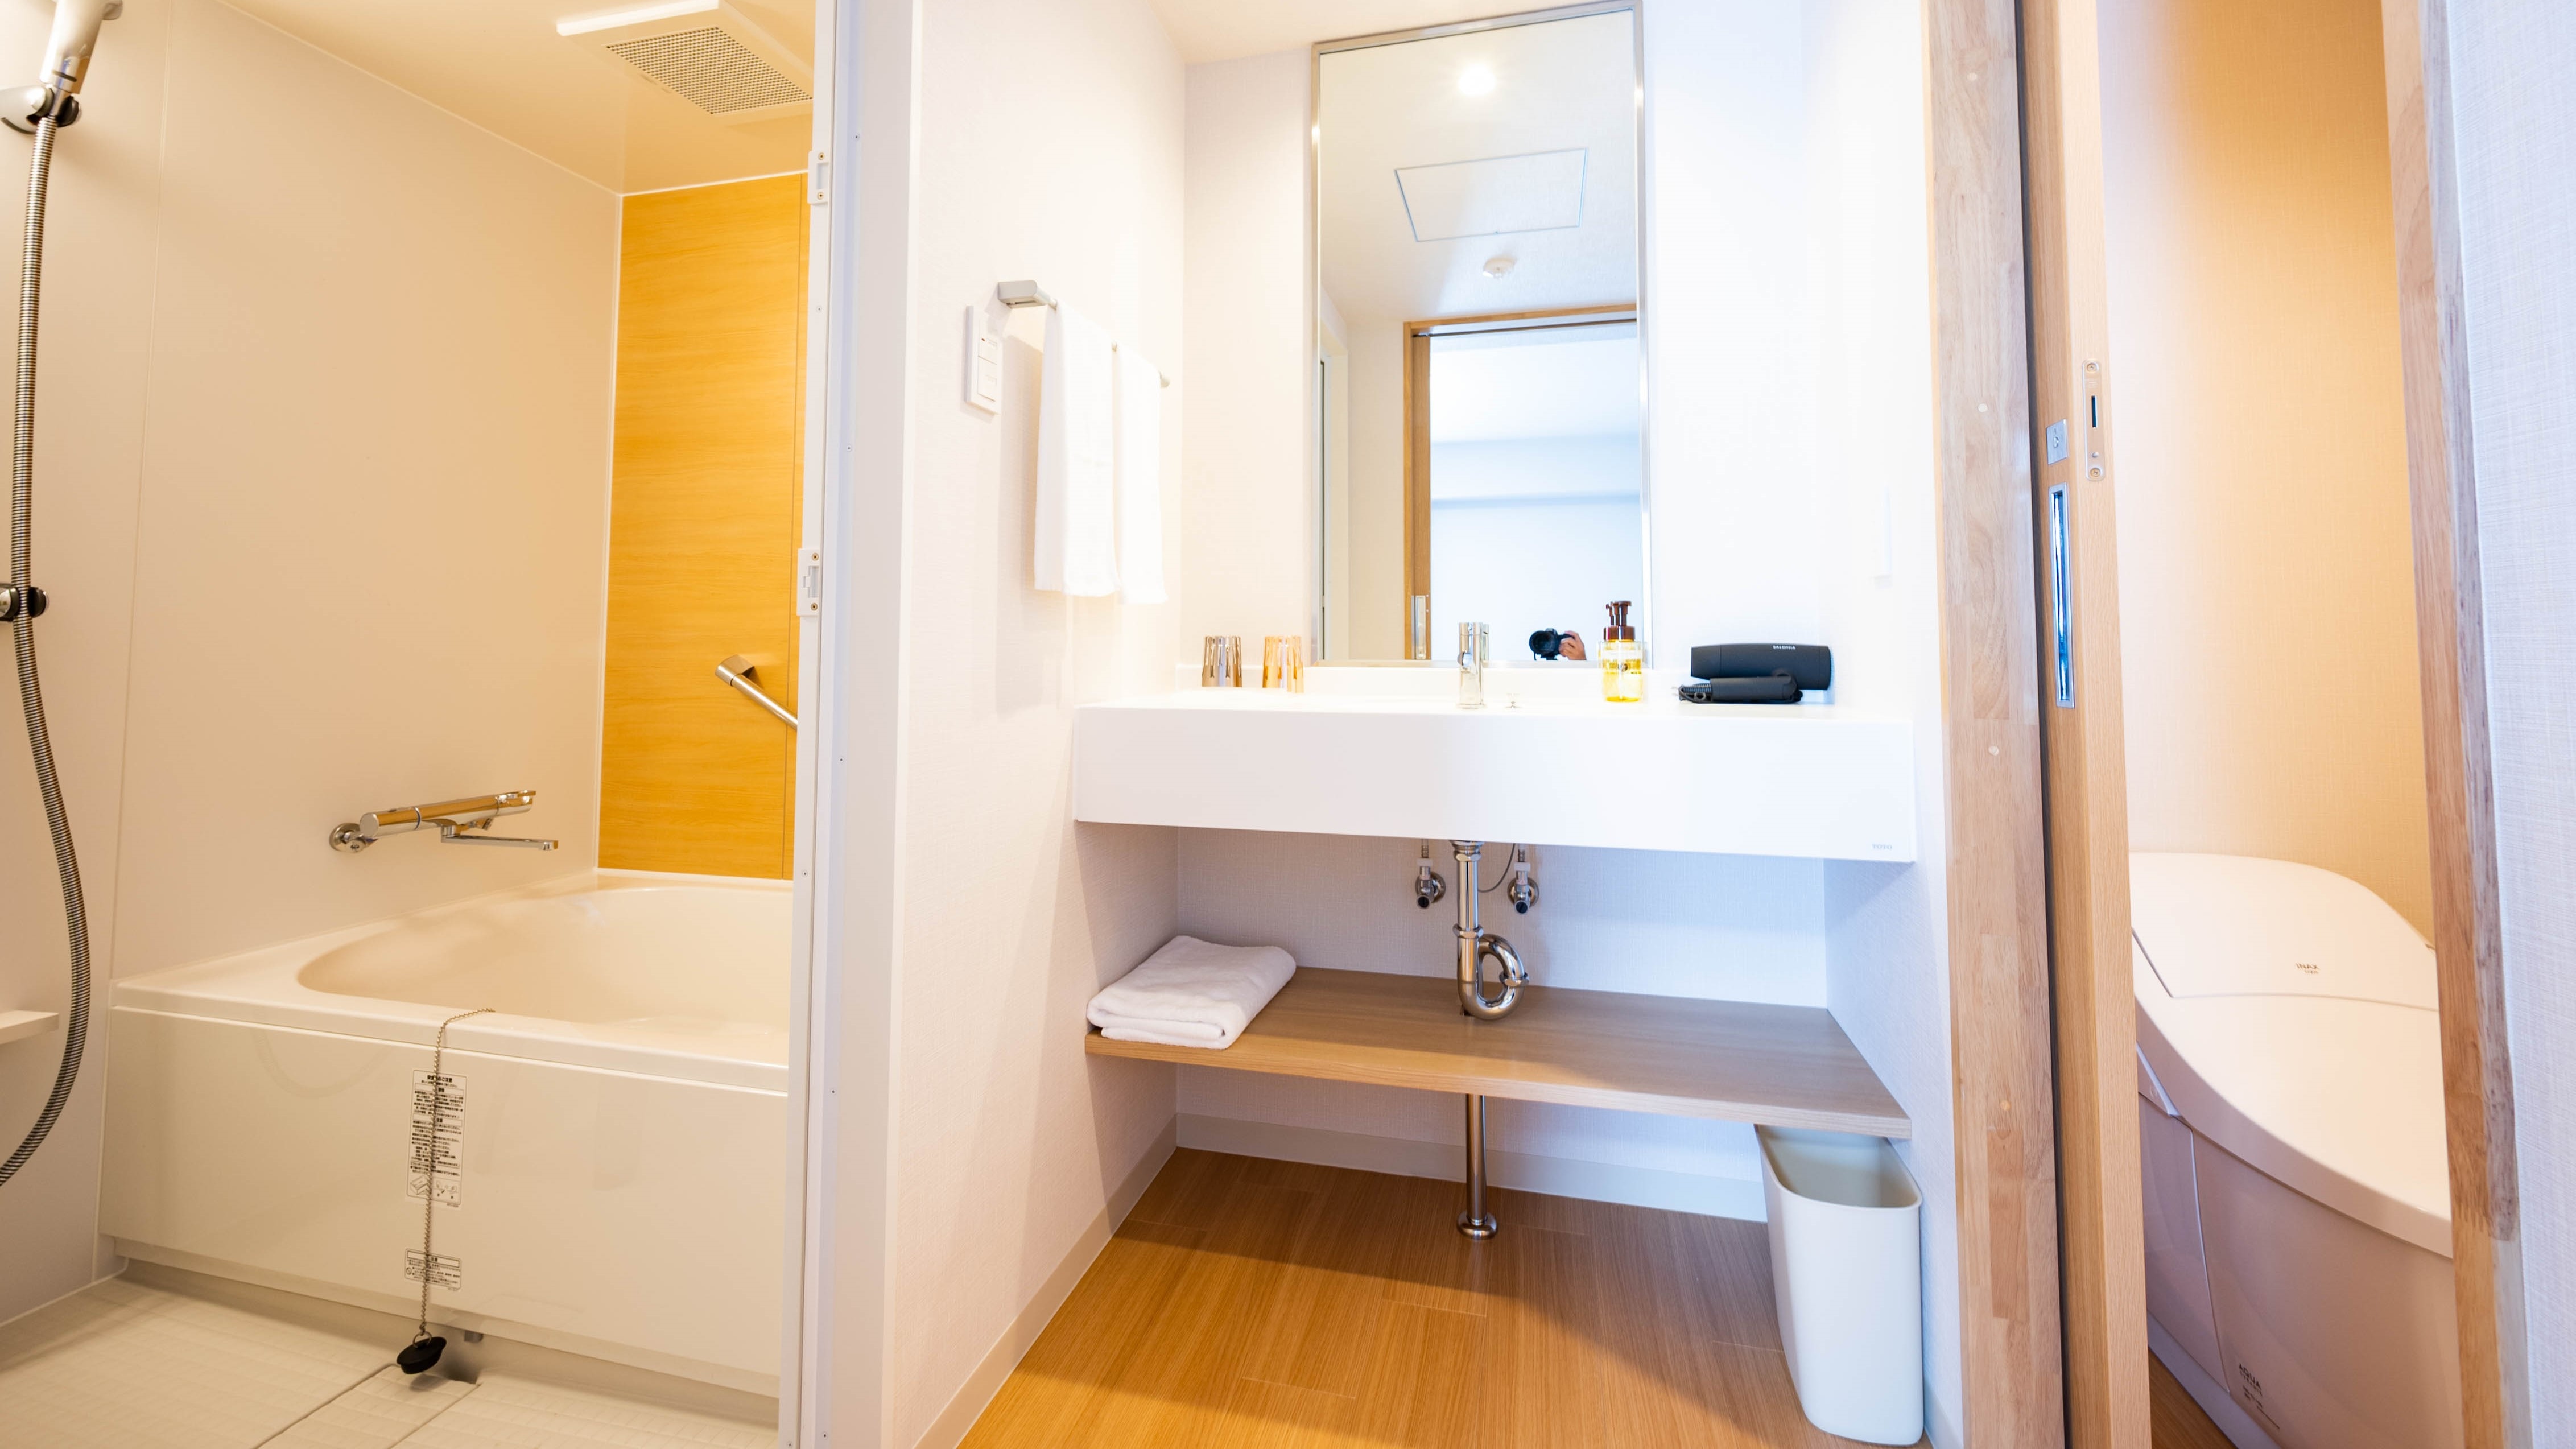 The deluxe twin bathroom is a separate type.